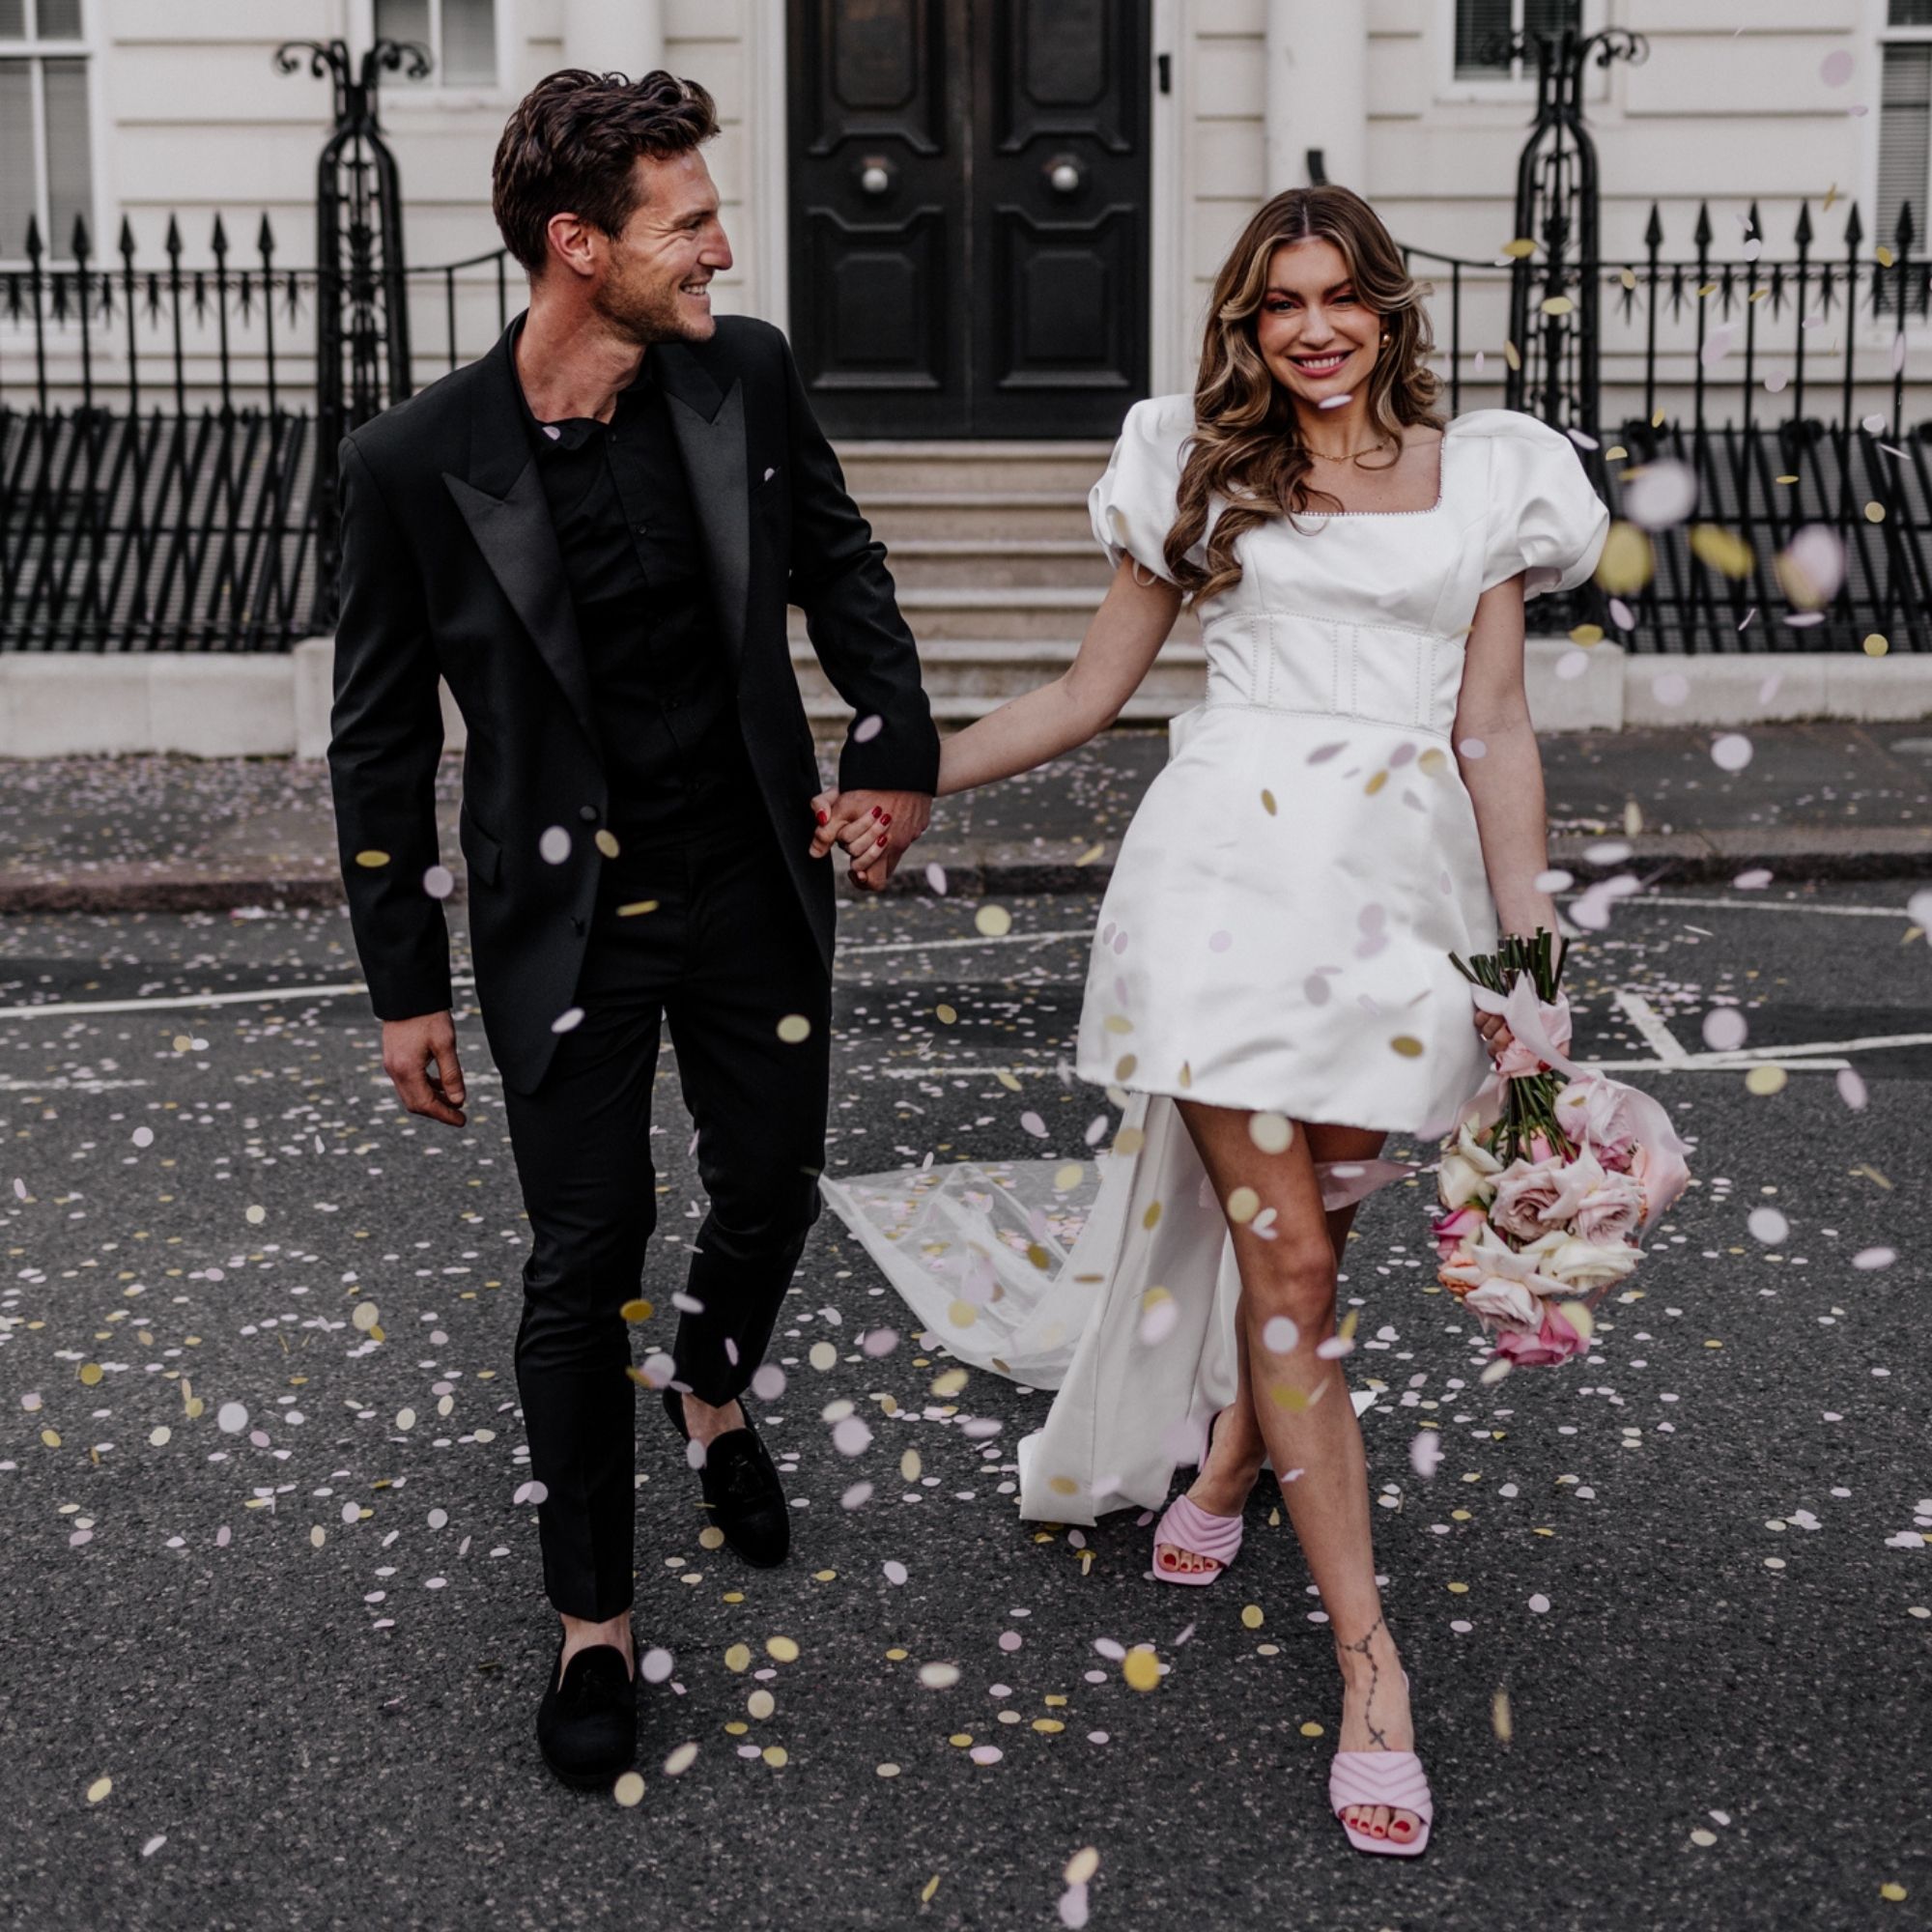 41 Courthouse Wedding Dresses for the Most Chic Wedding Day Look